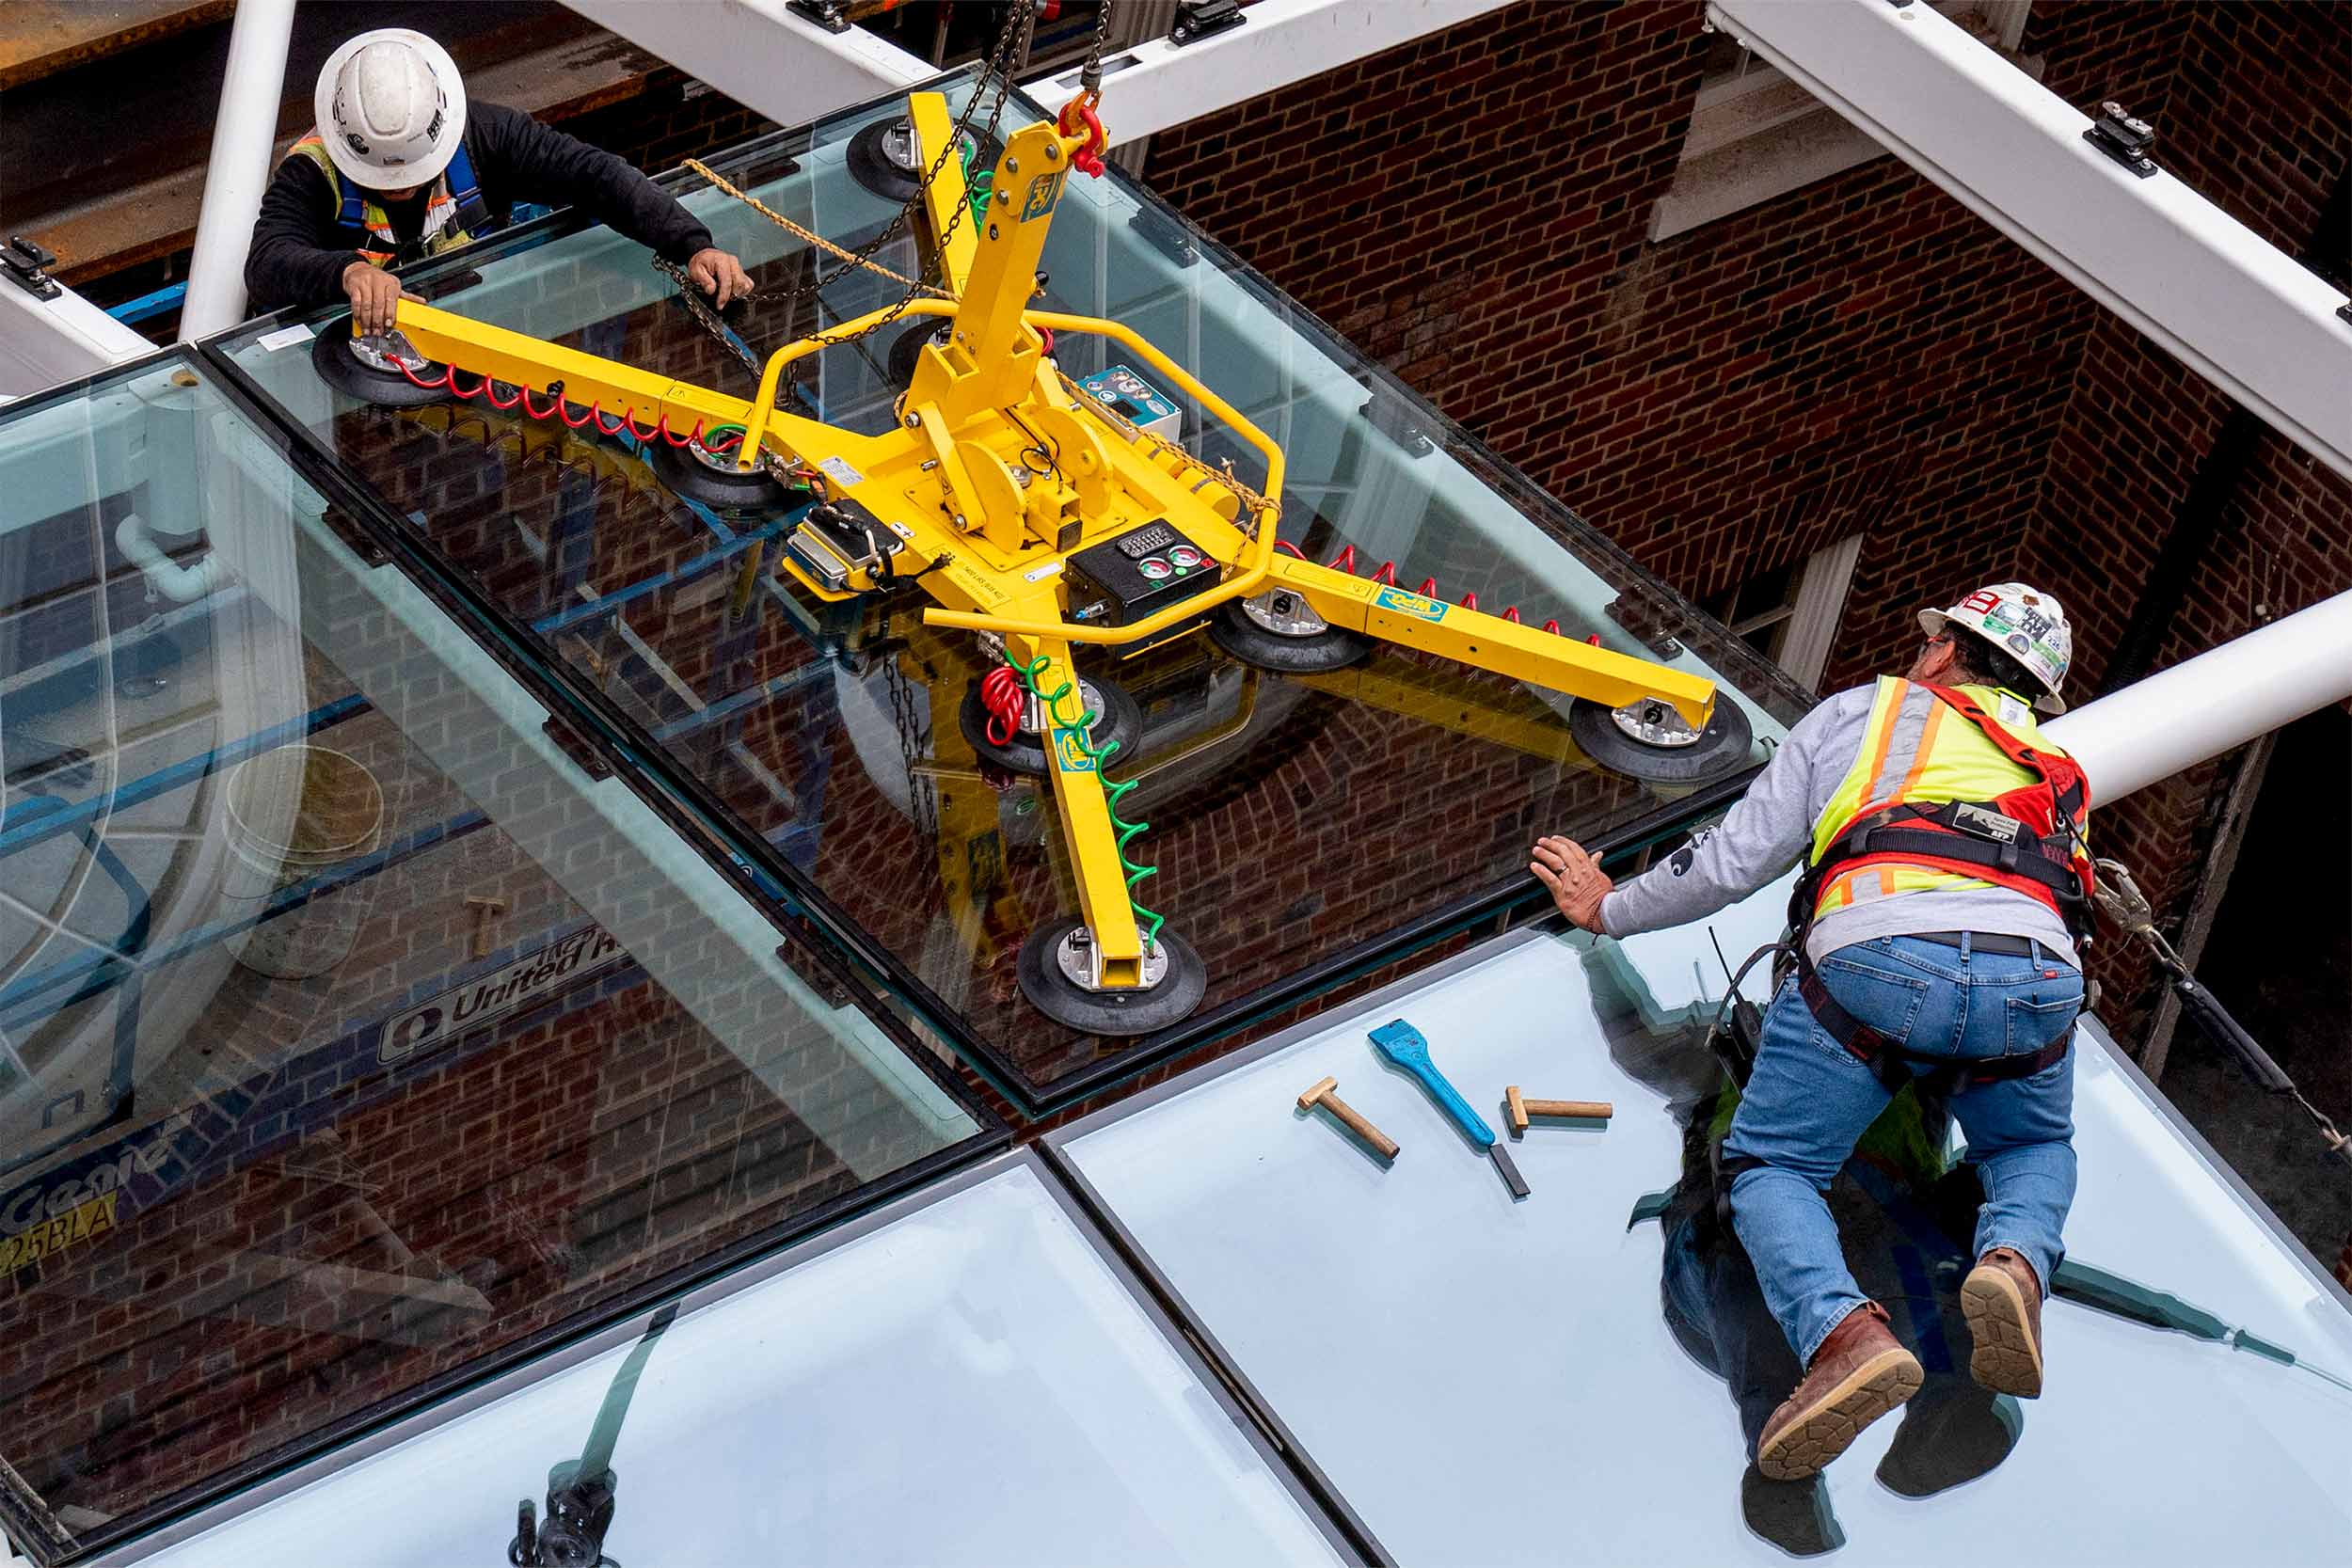 On hands and knees, two workers guide the pane of glass into the frame